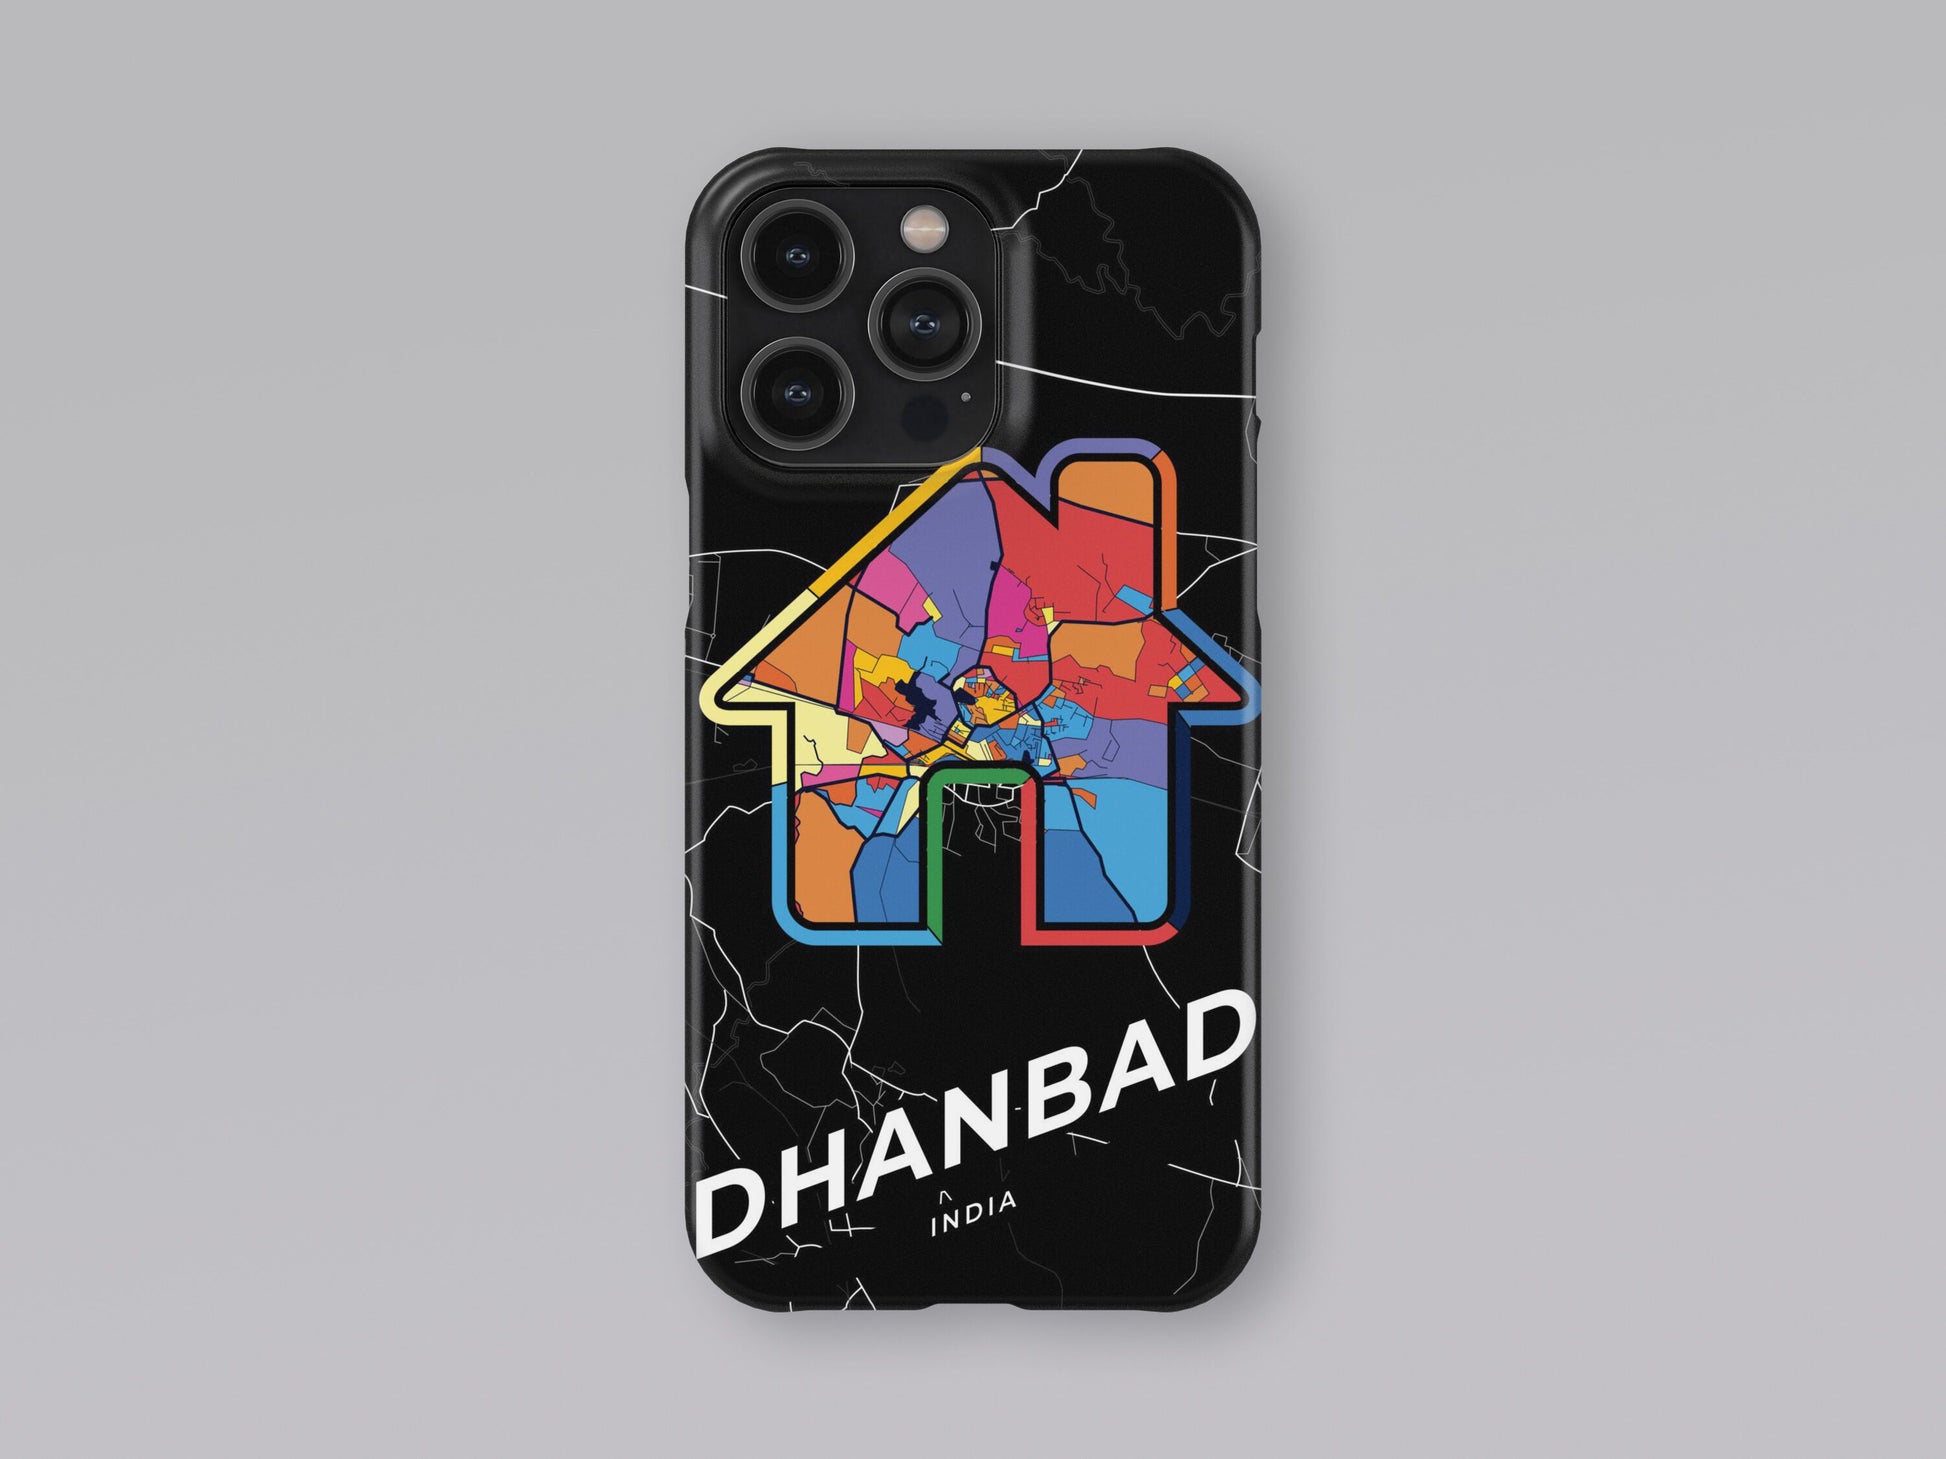 Dhanbad India slim phone case with colorful icon. Birthday, wedding or housewarming gift. Couple match cases. 3